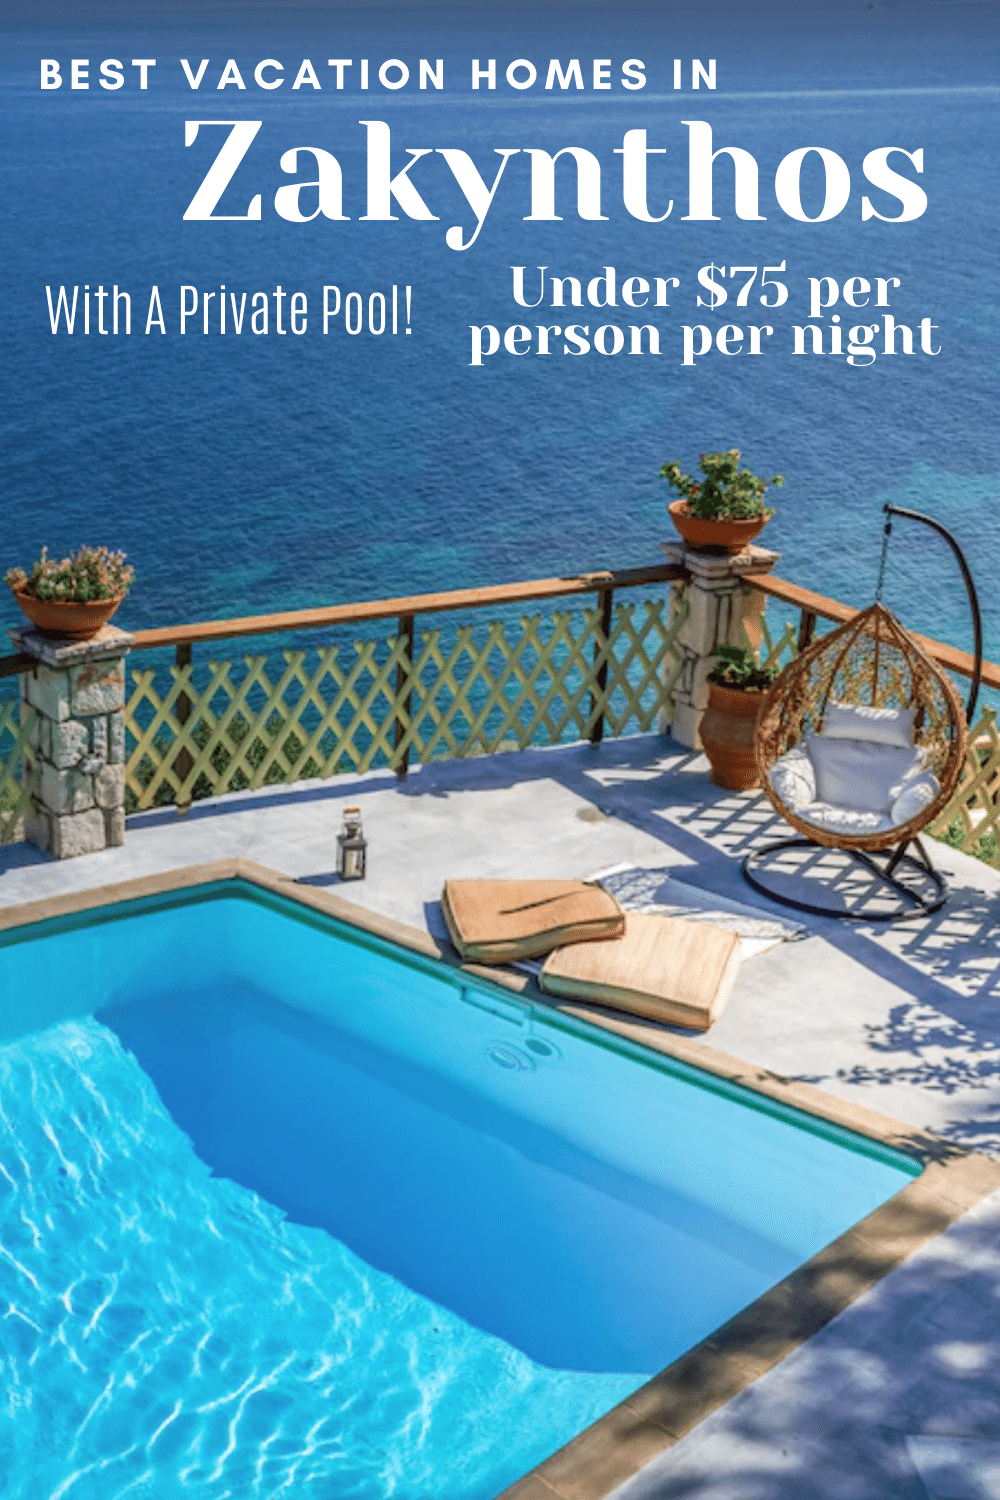 PIN ME! Best vacation homes with a pool in Zakynthos under $75 per person per night